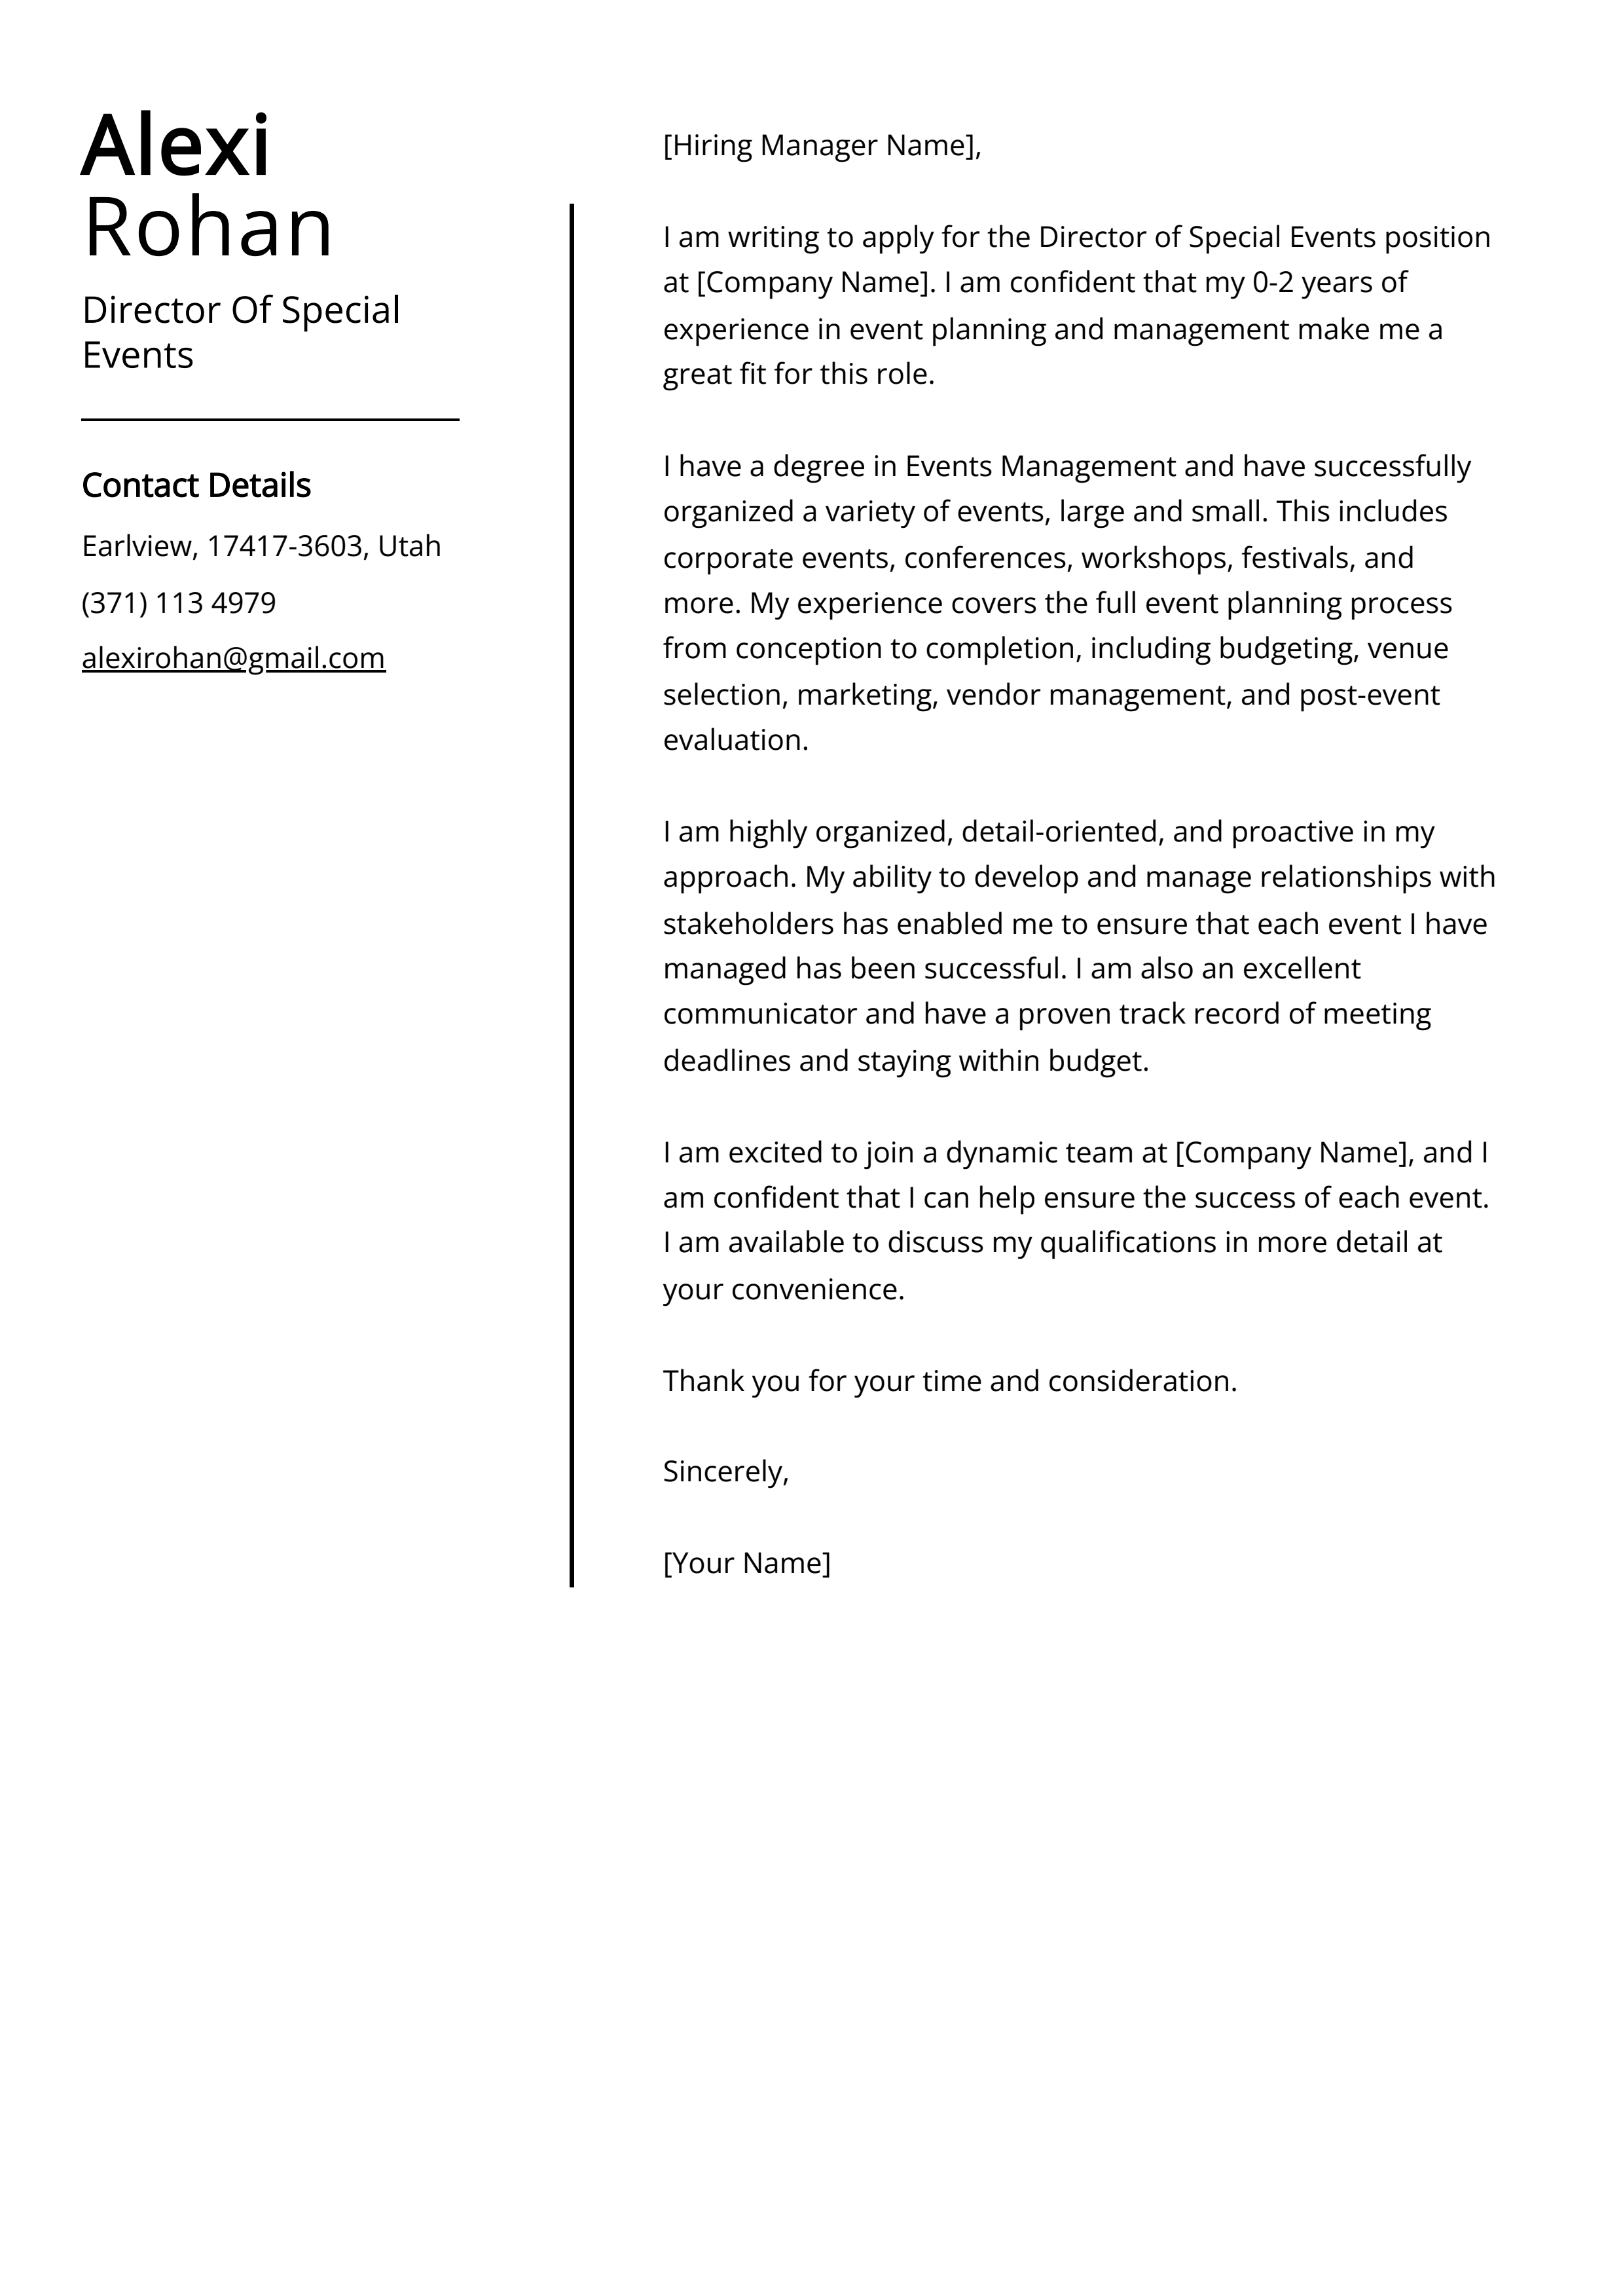 Director Of Special Events Cover Letter Example